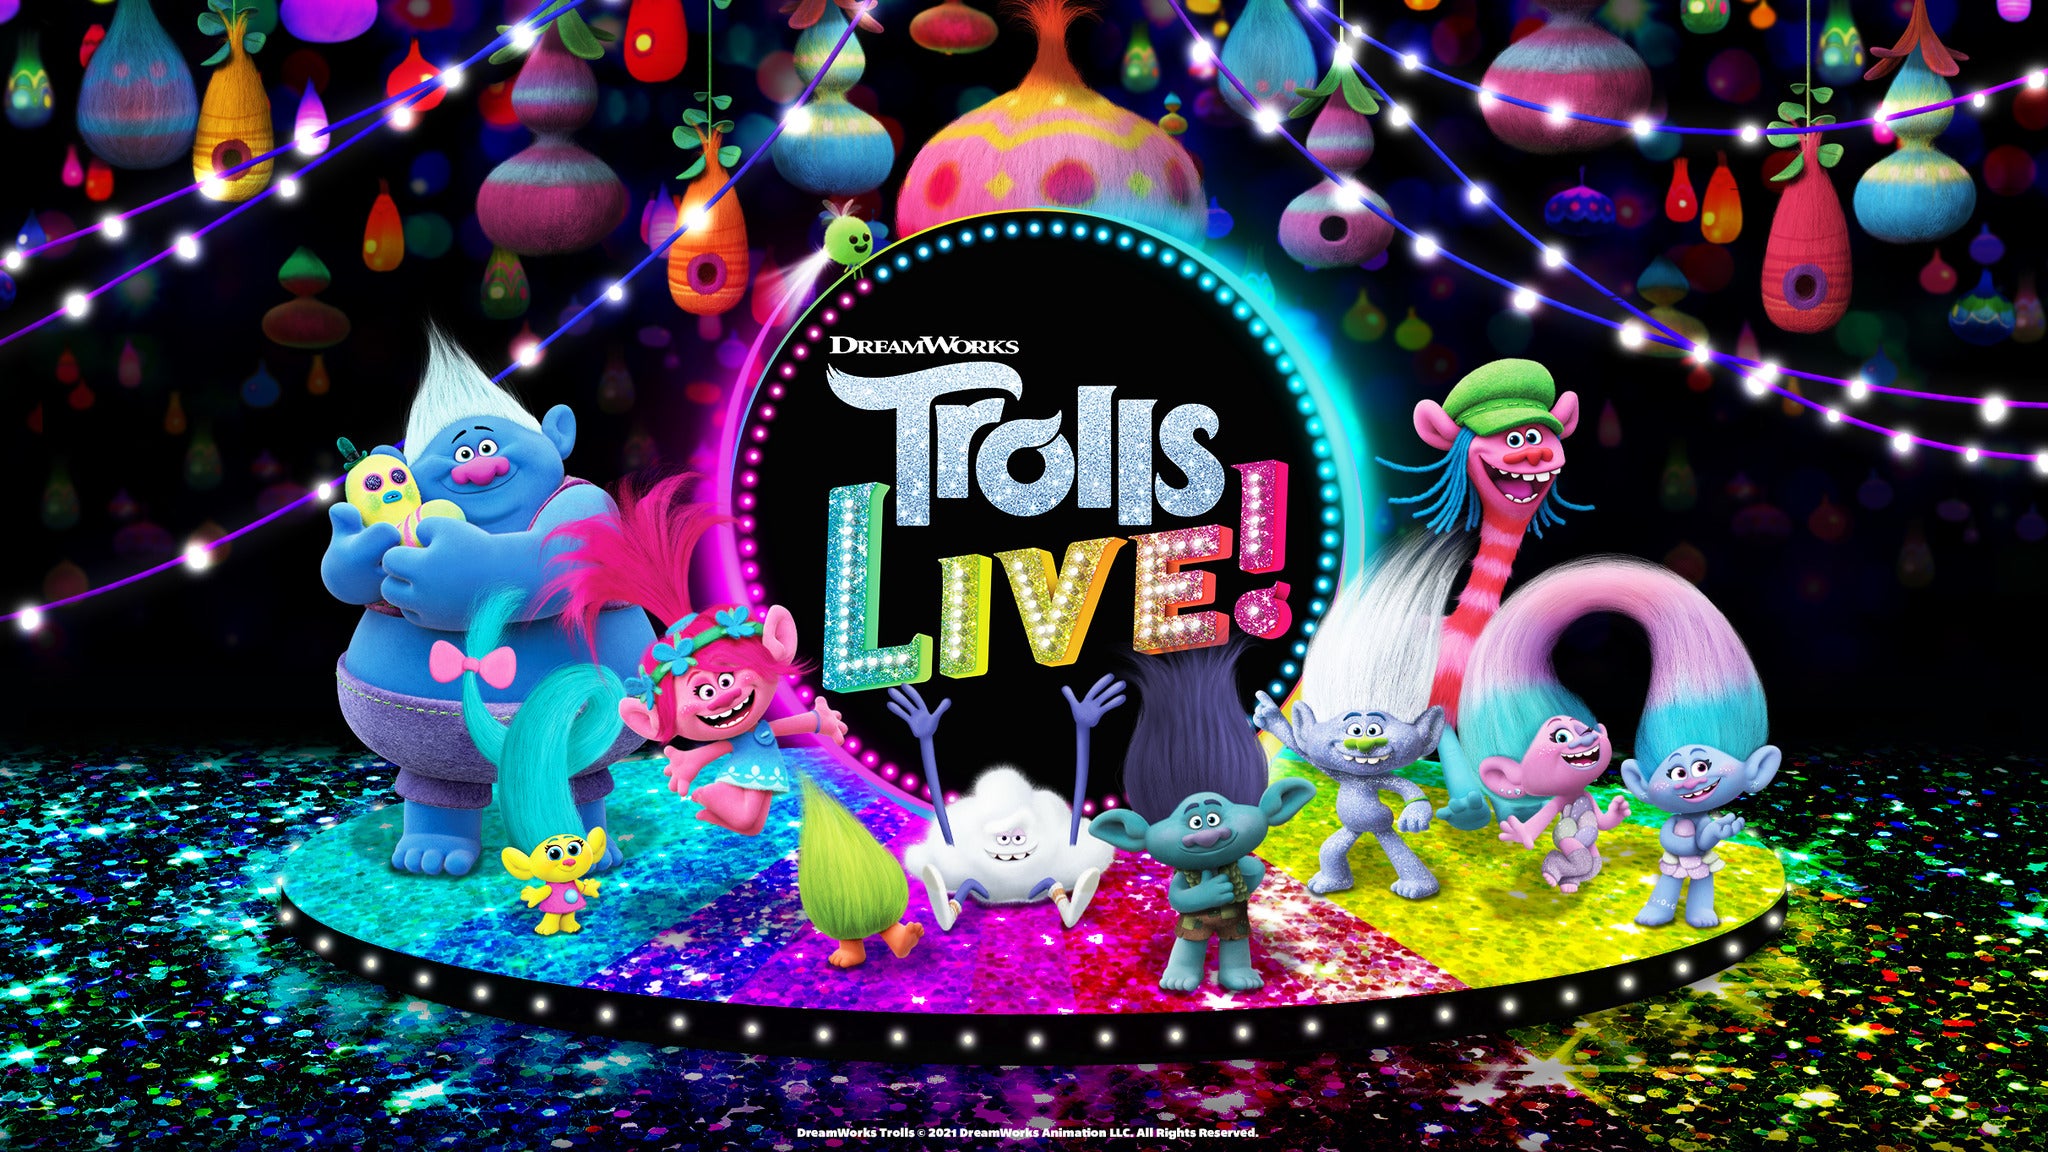 Trolls LIVE! at Mayo Civic Center Arena - Rochester, MN 55904